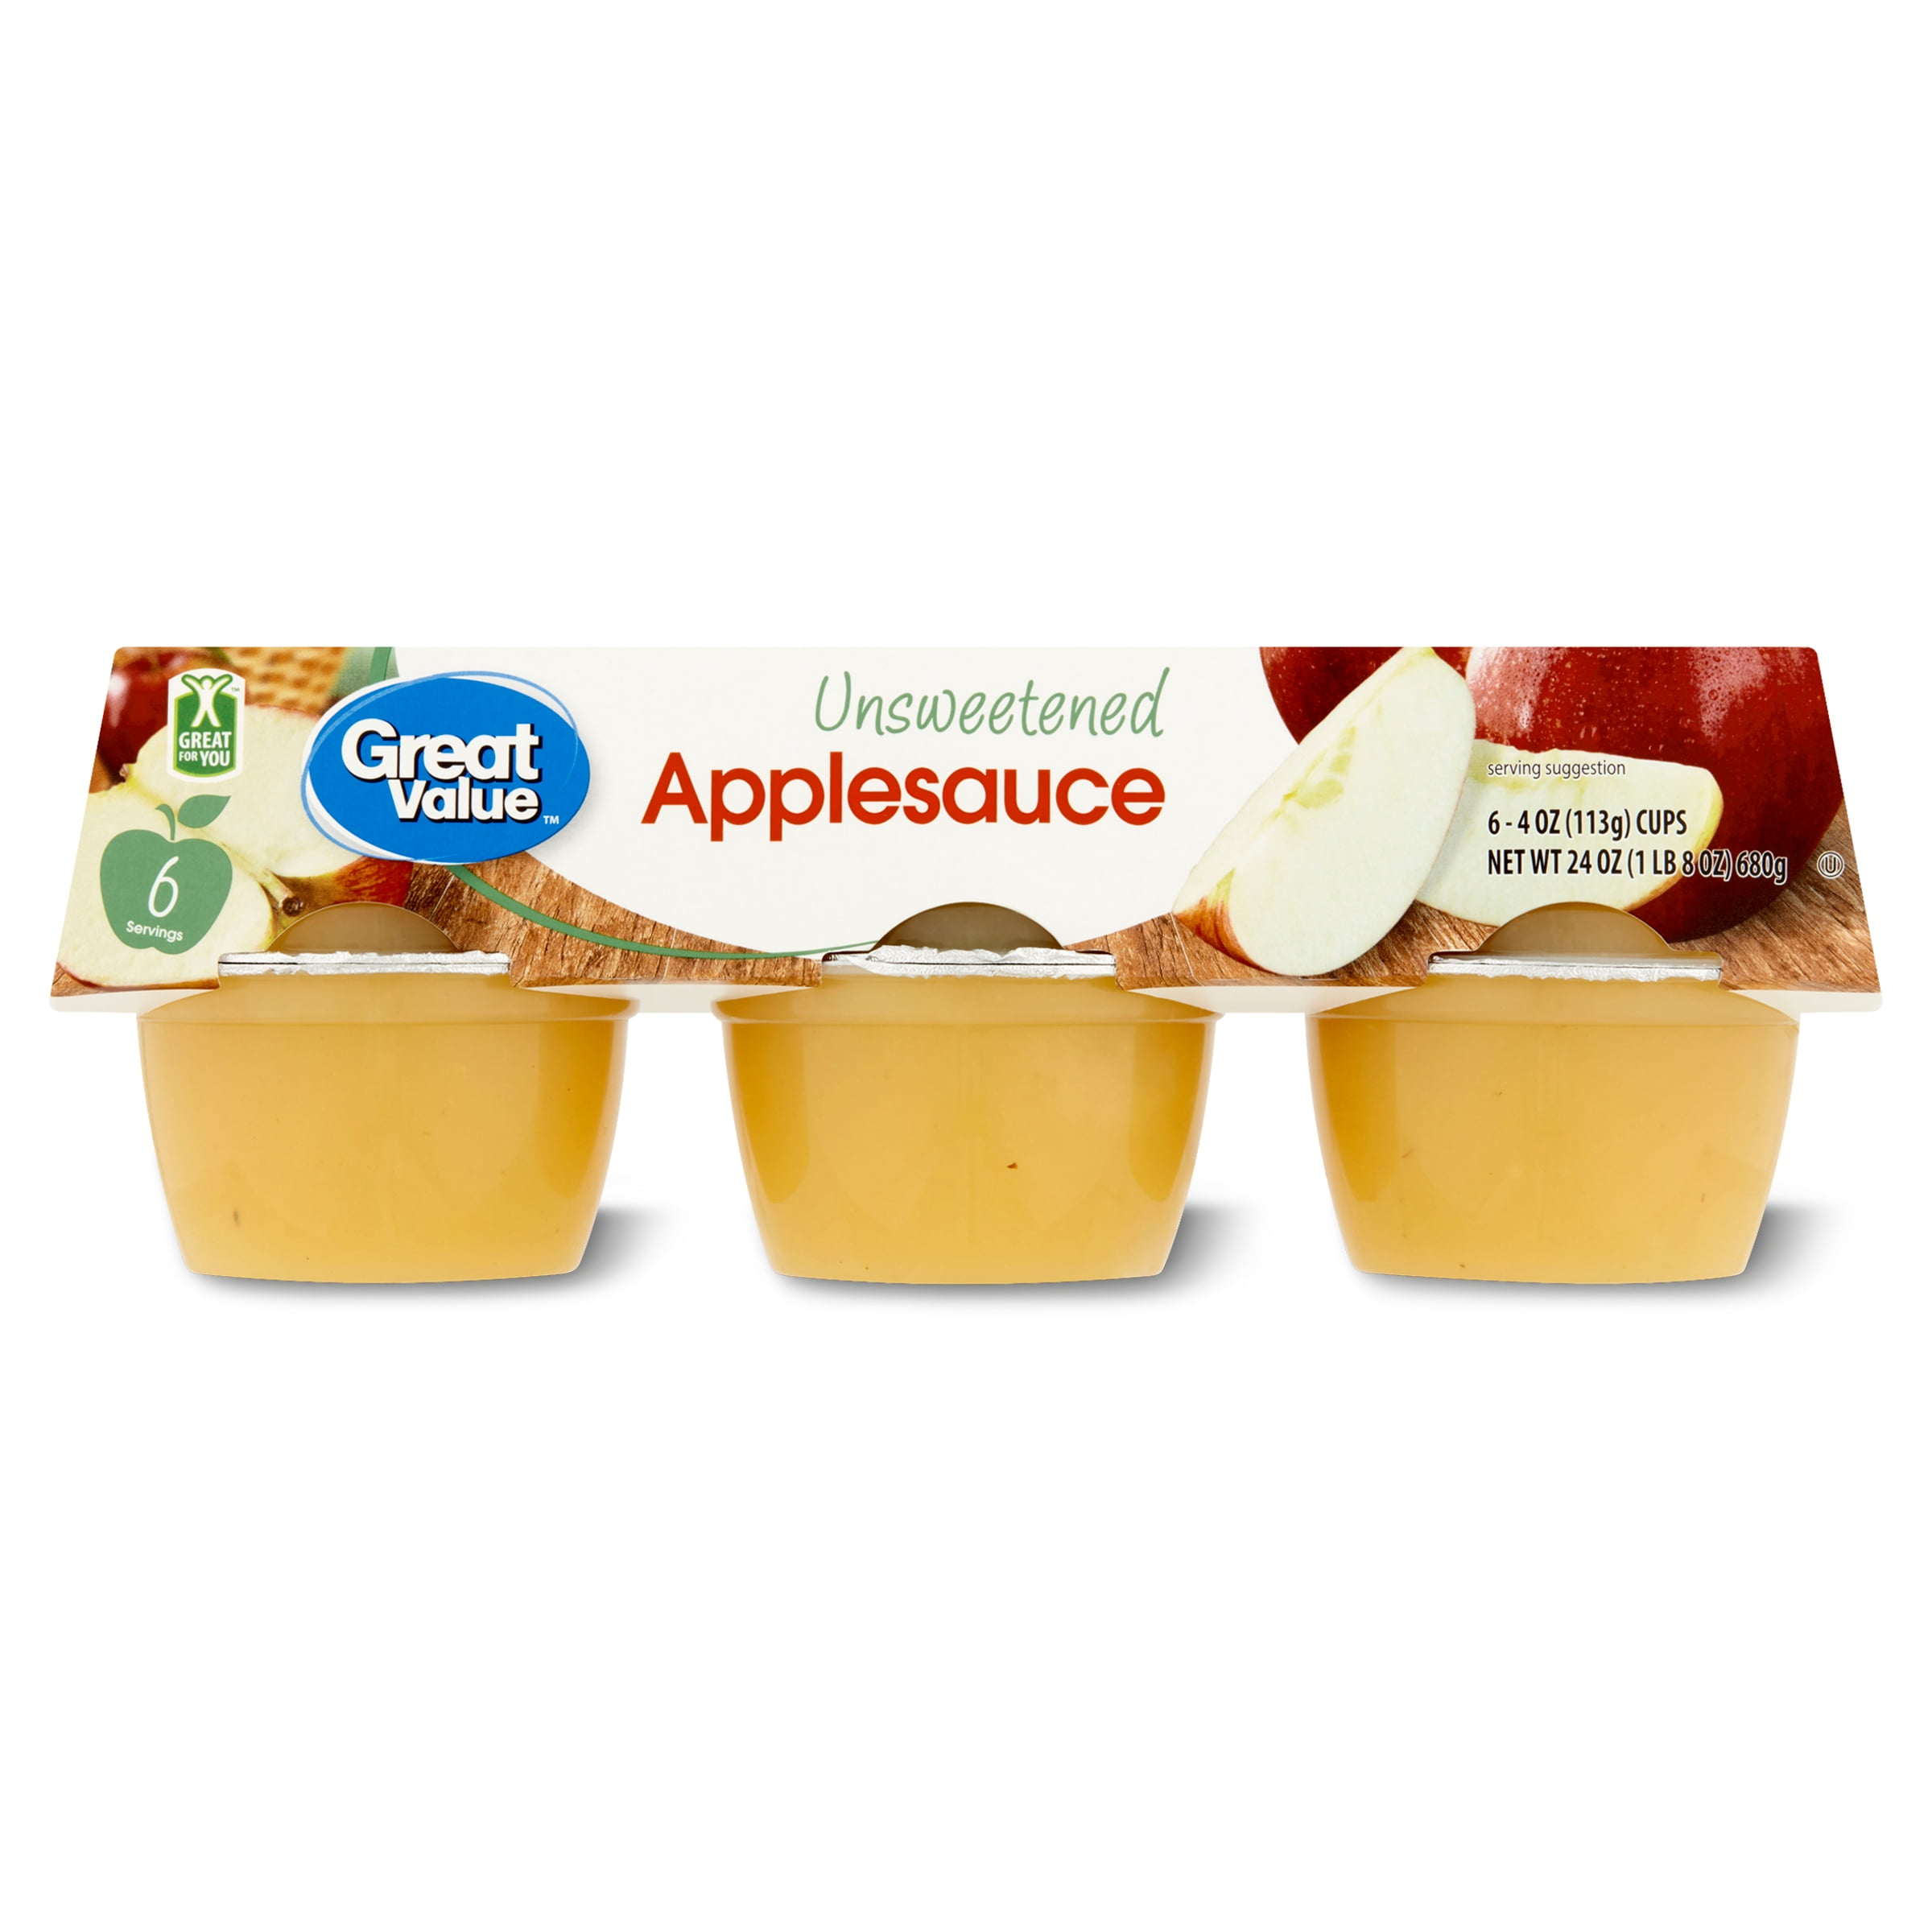 (6 Cups) Great Value Unsweetened Applesauce, 4 oz